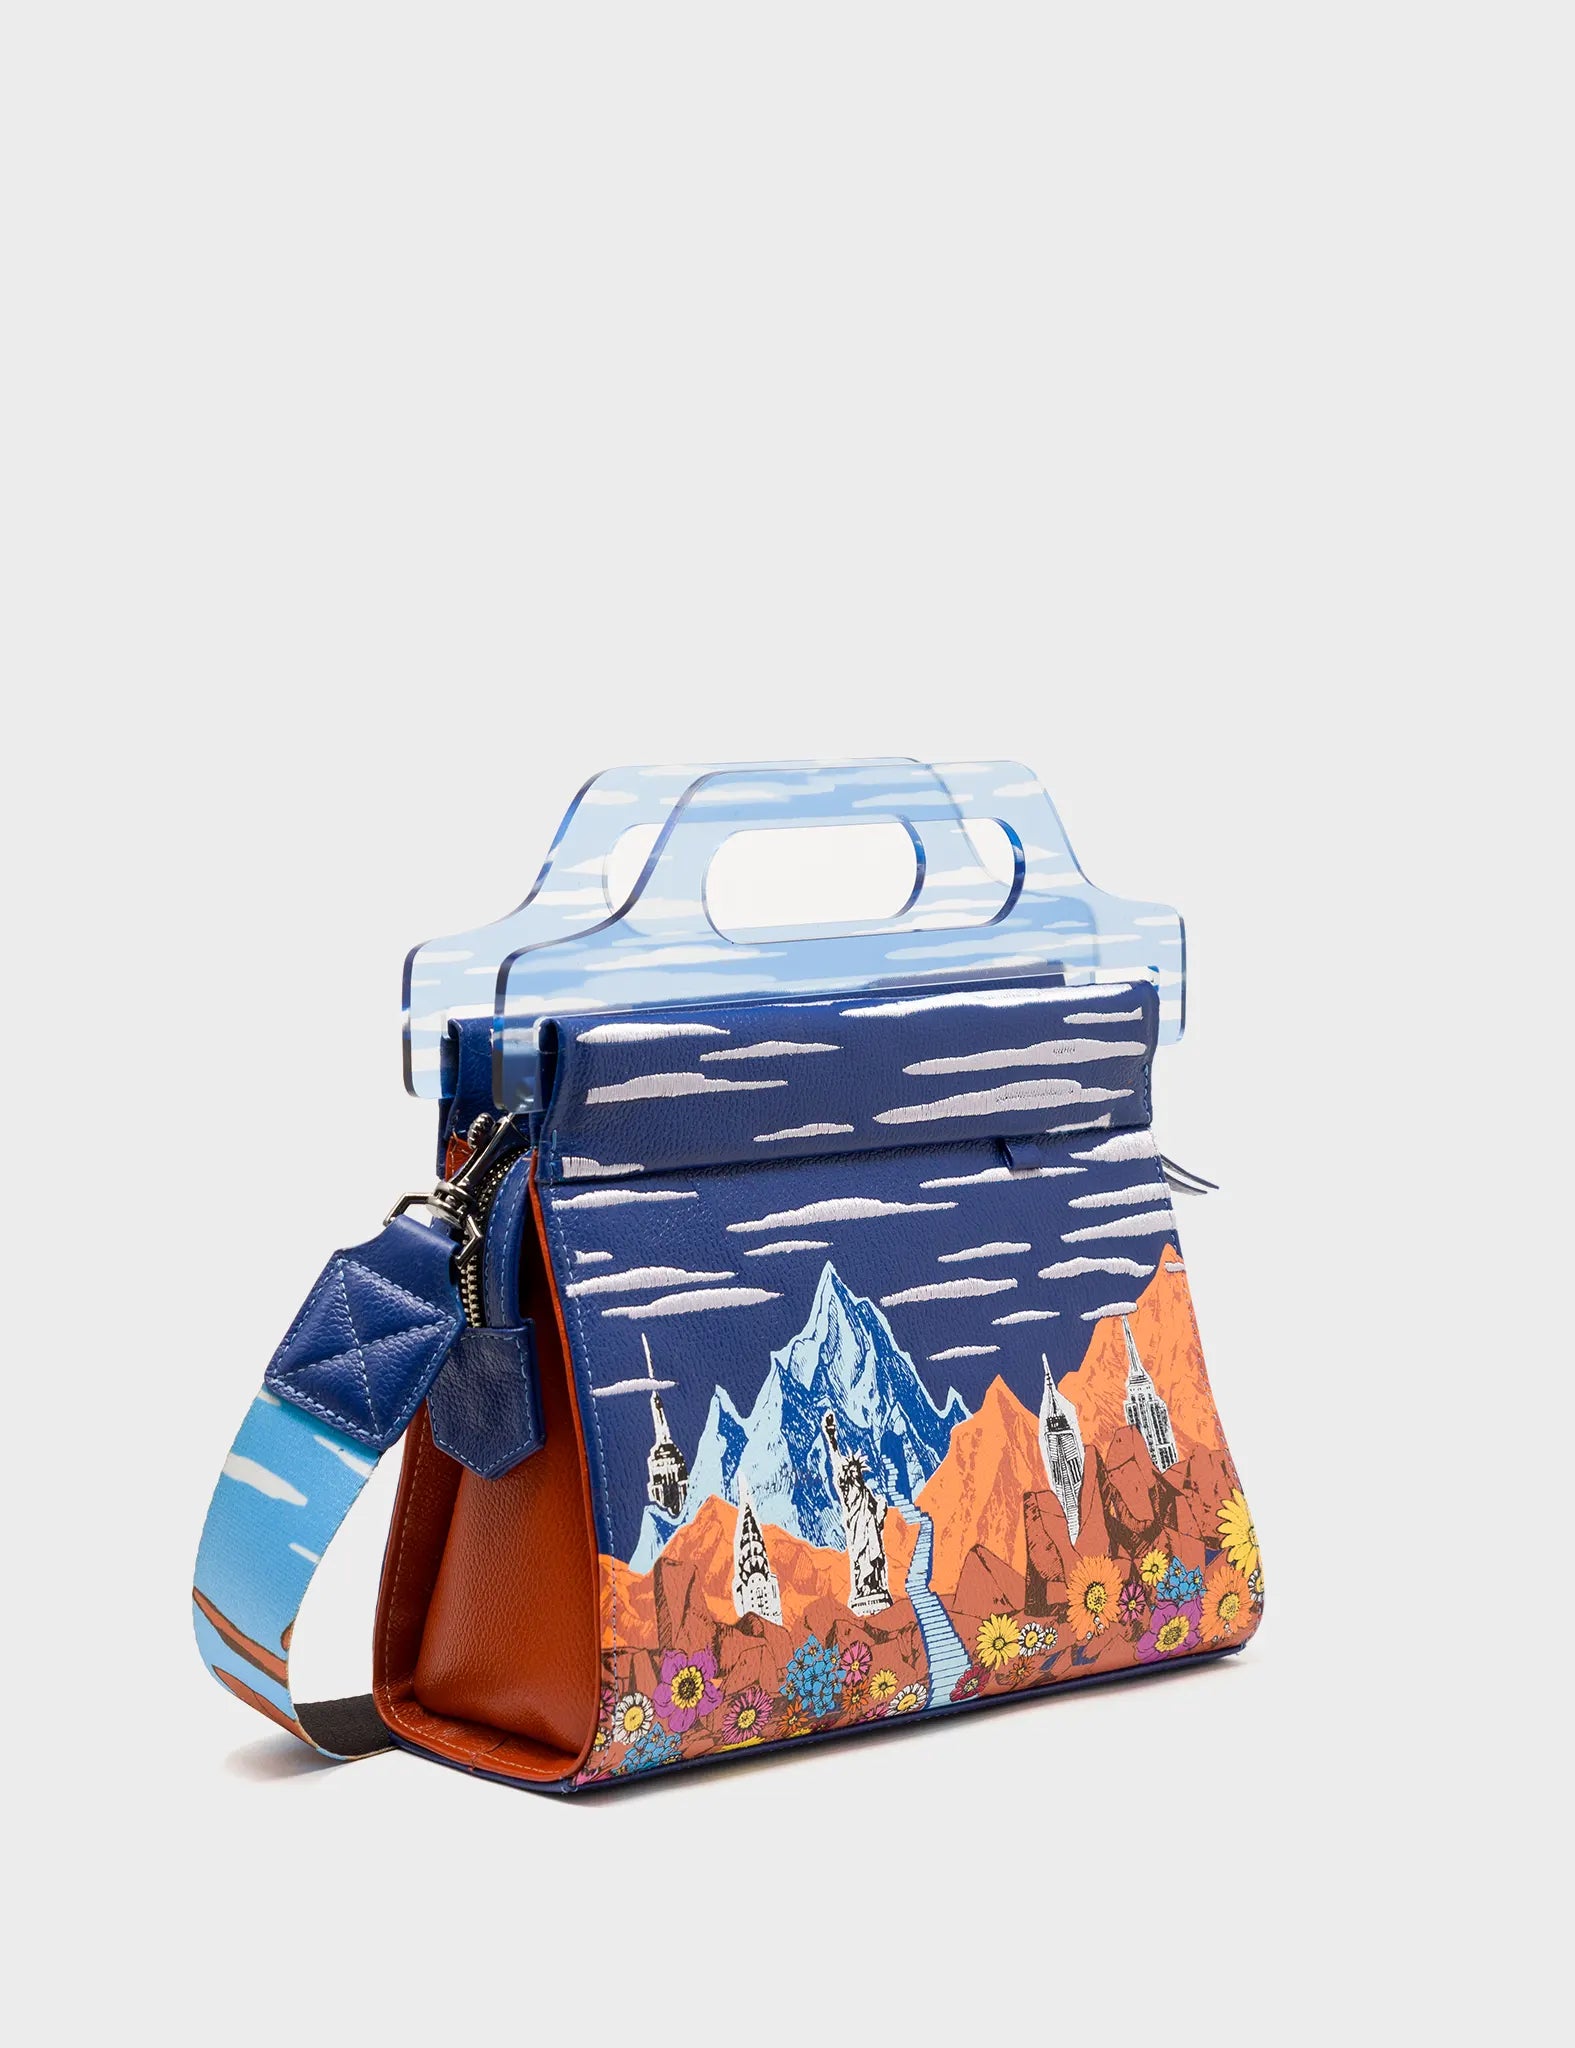 Blue Leather Crossbody Handbag Plastic Handle - Mountains, Flowers and Clouds Design